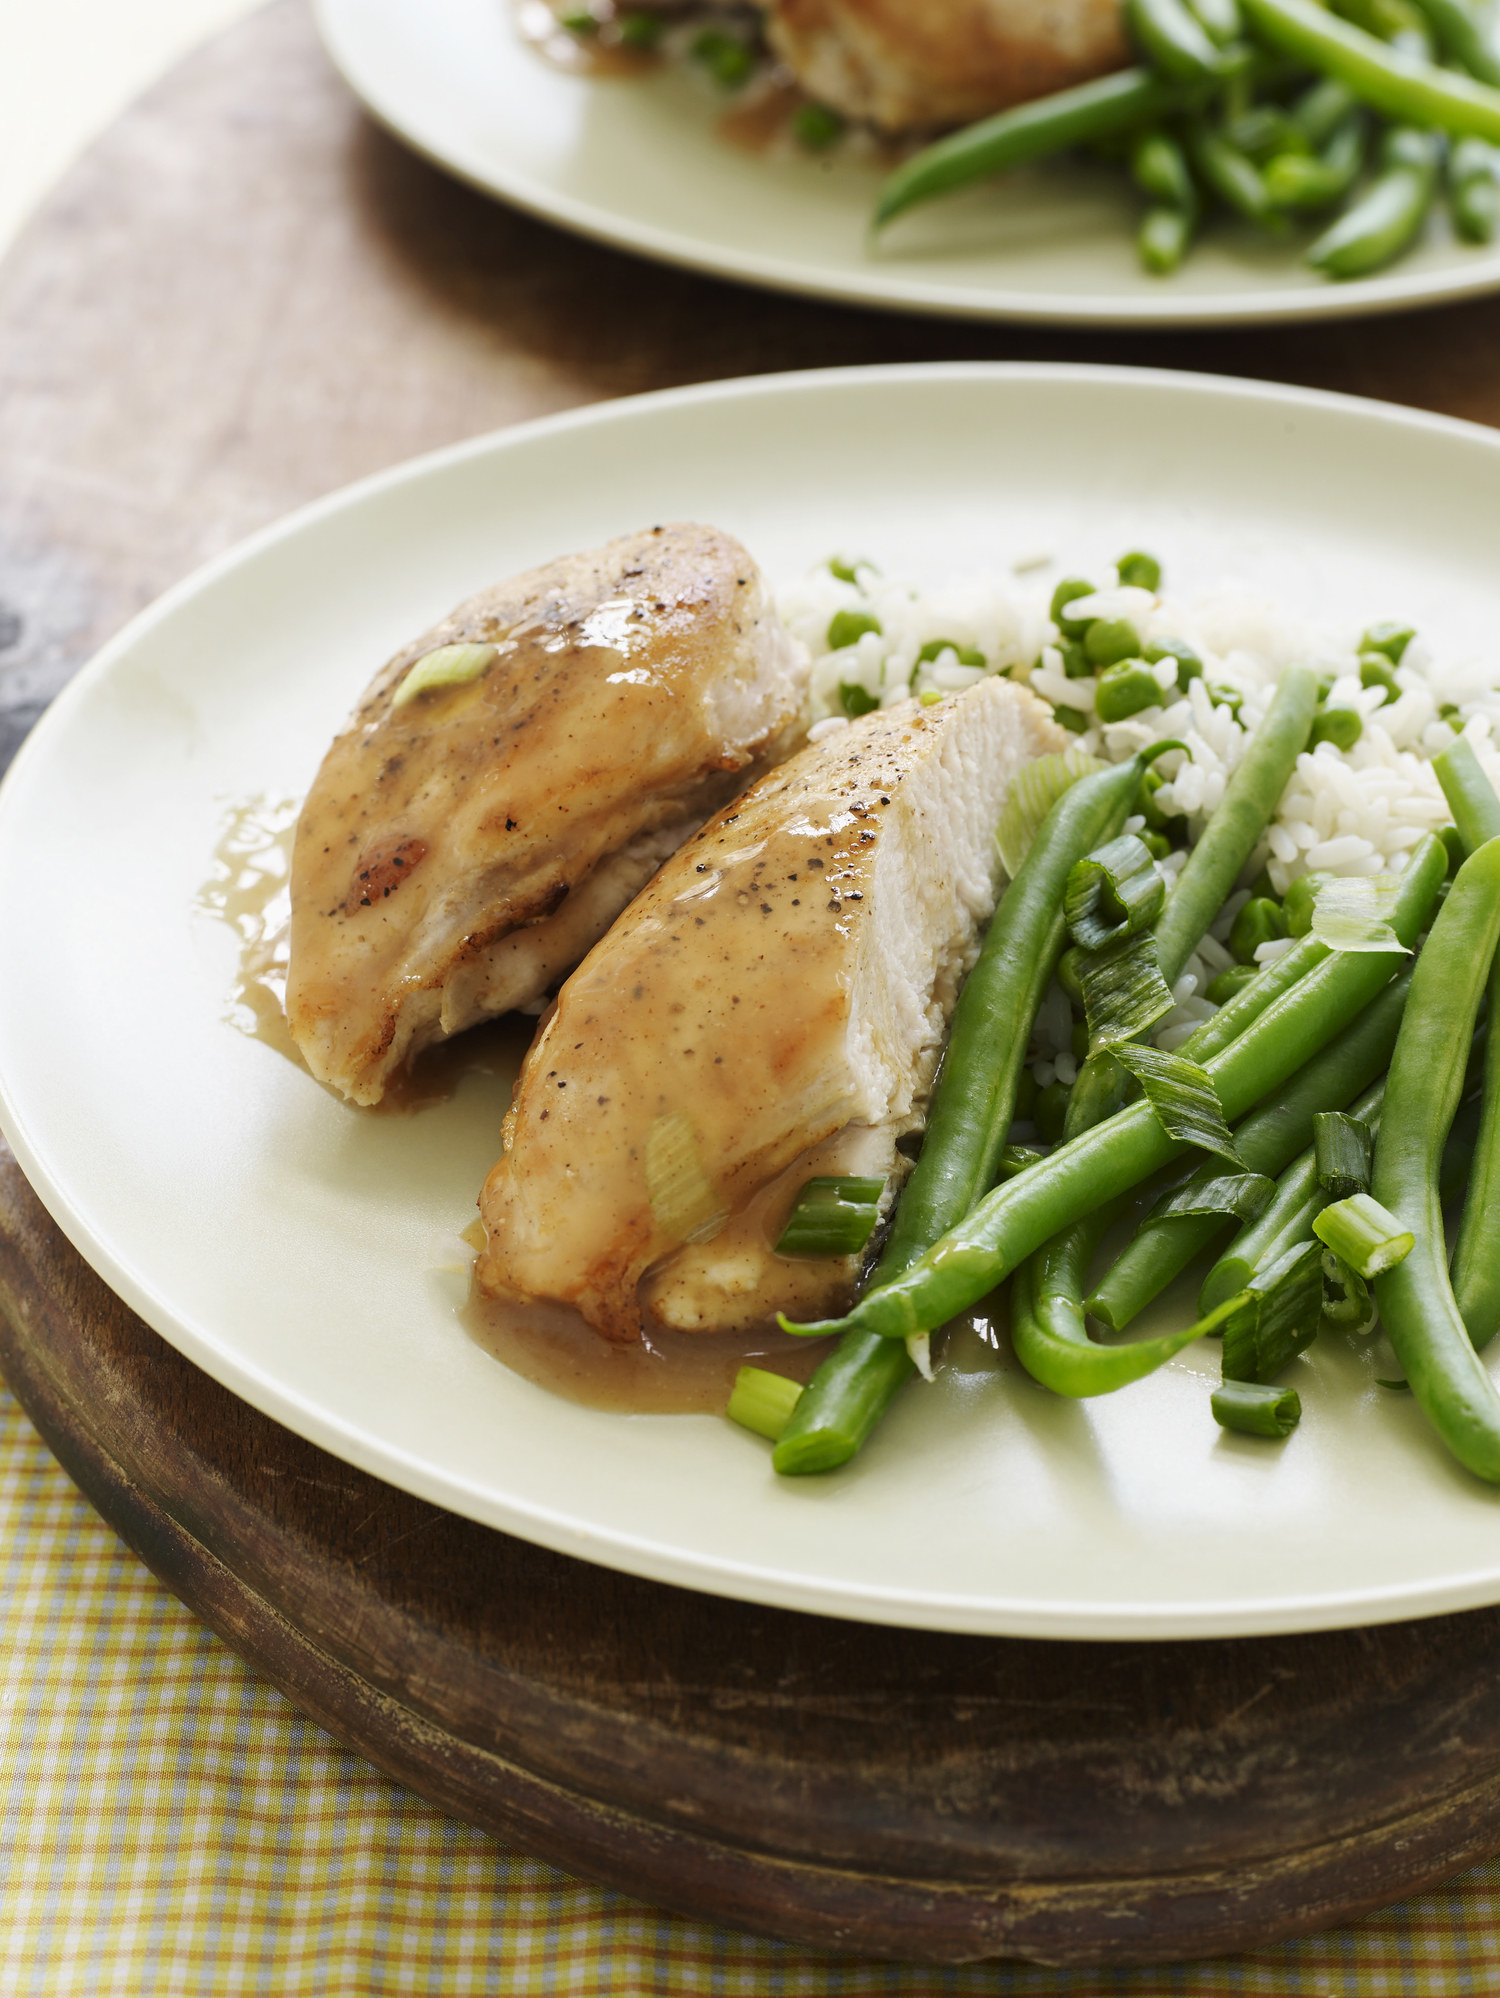 Chicken breast with string beans.